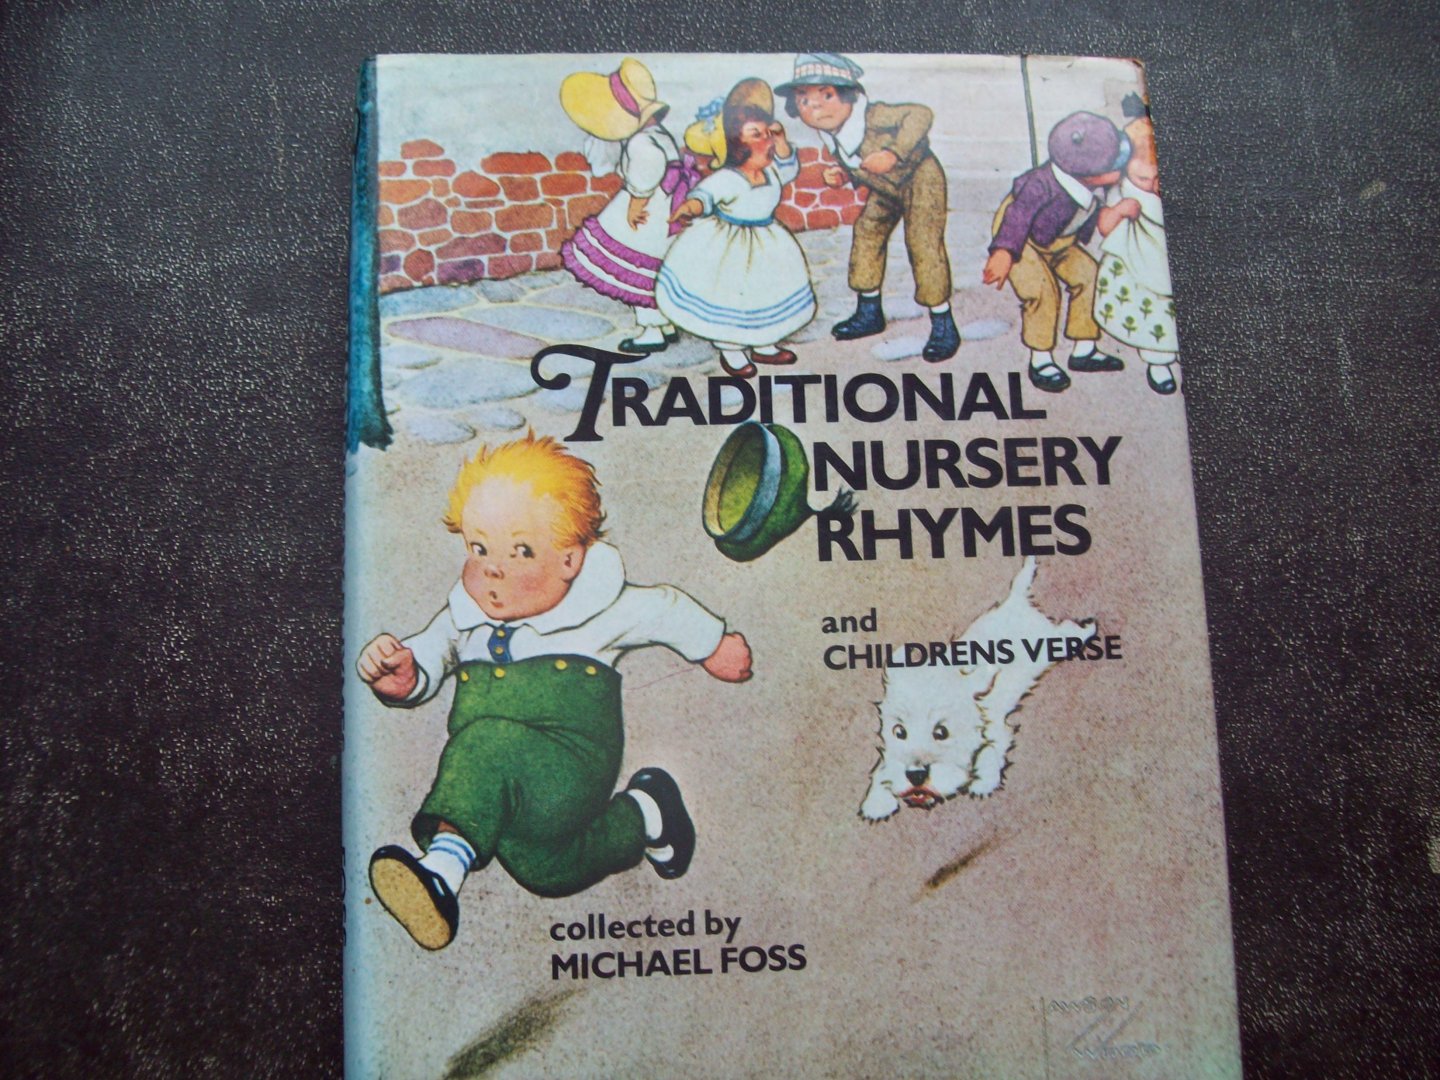 Michael Foss - "Traditional Nursery Rhymes and Childrens Verse"  Designed by Leslie & Lorraine Gerry.